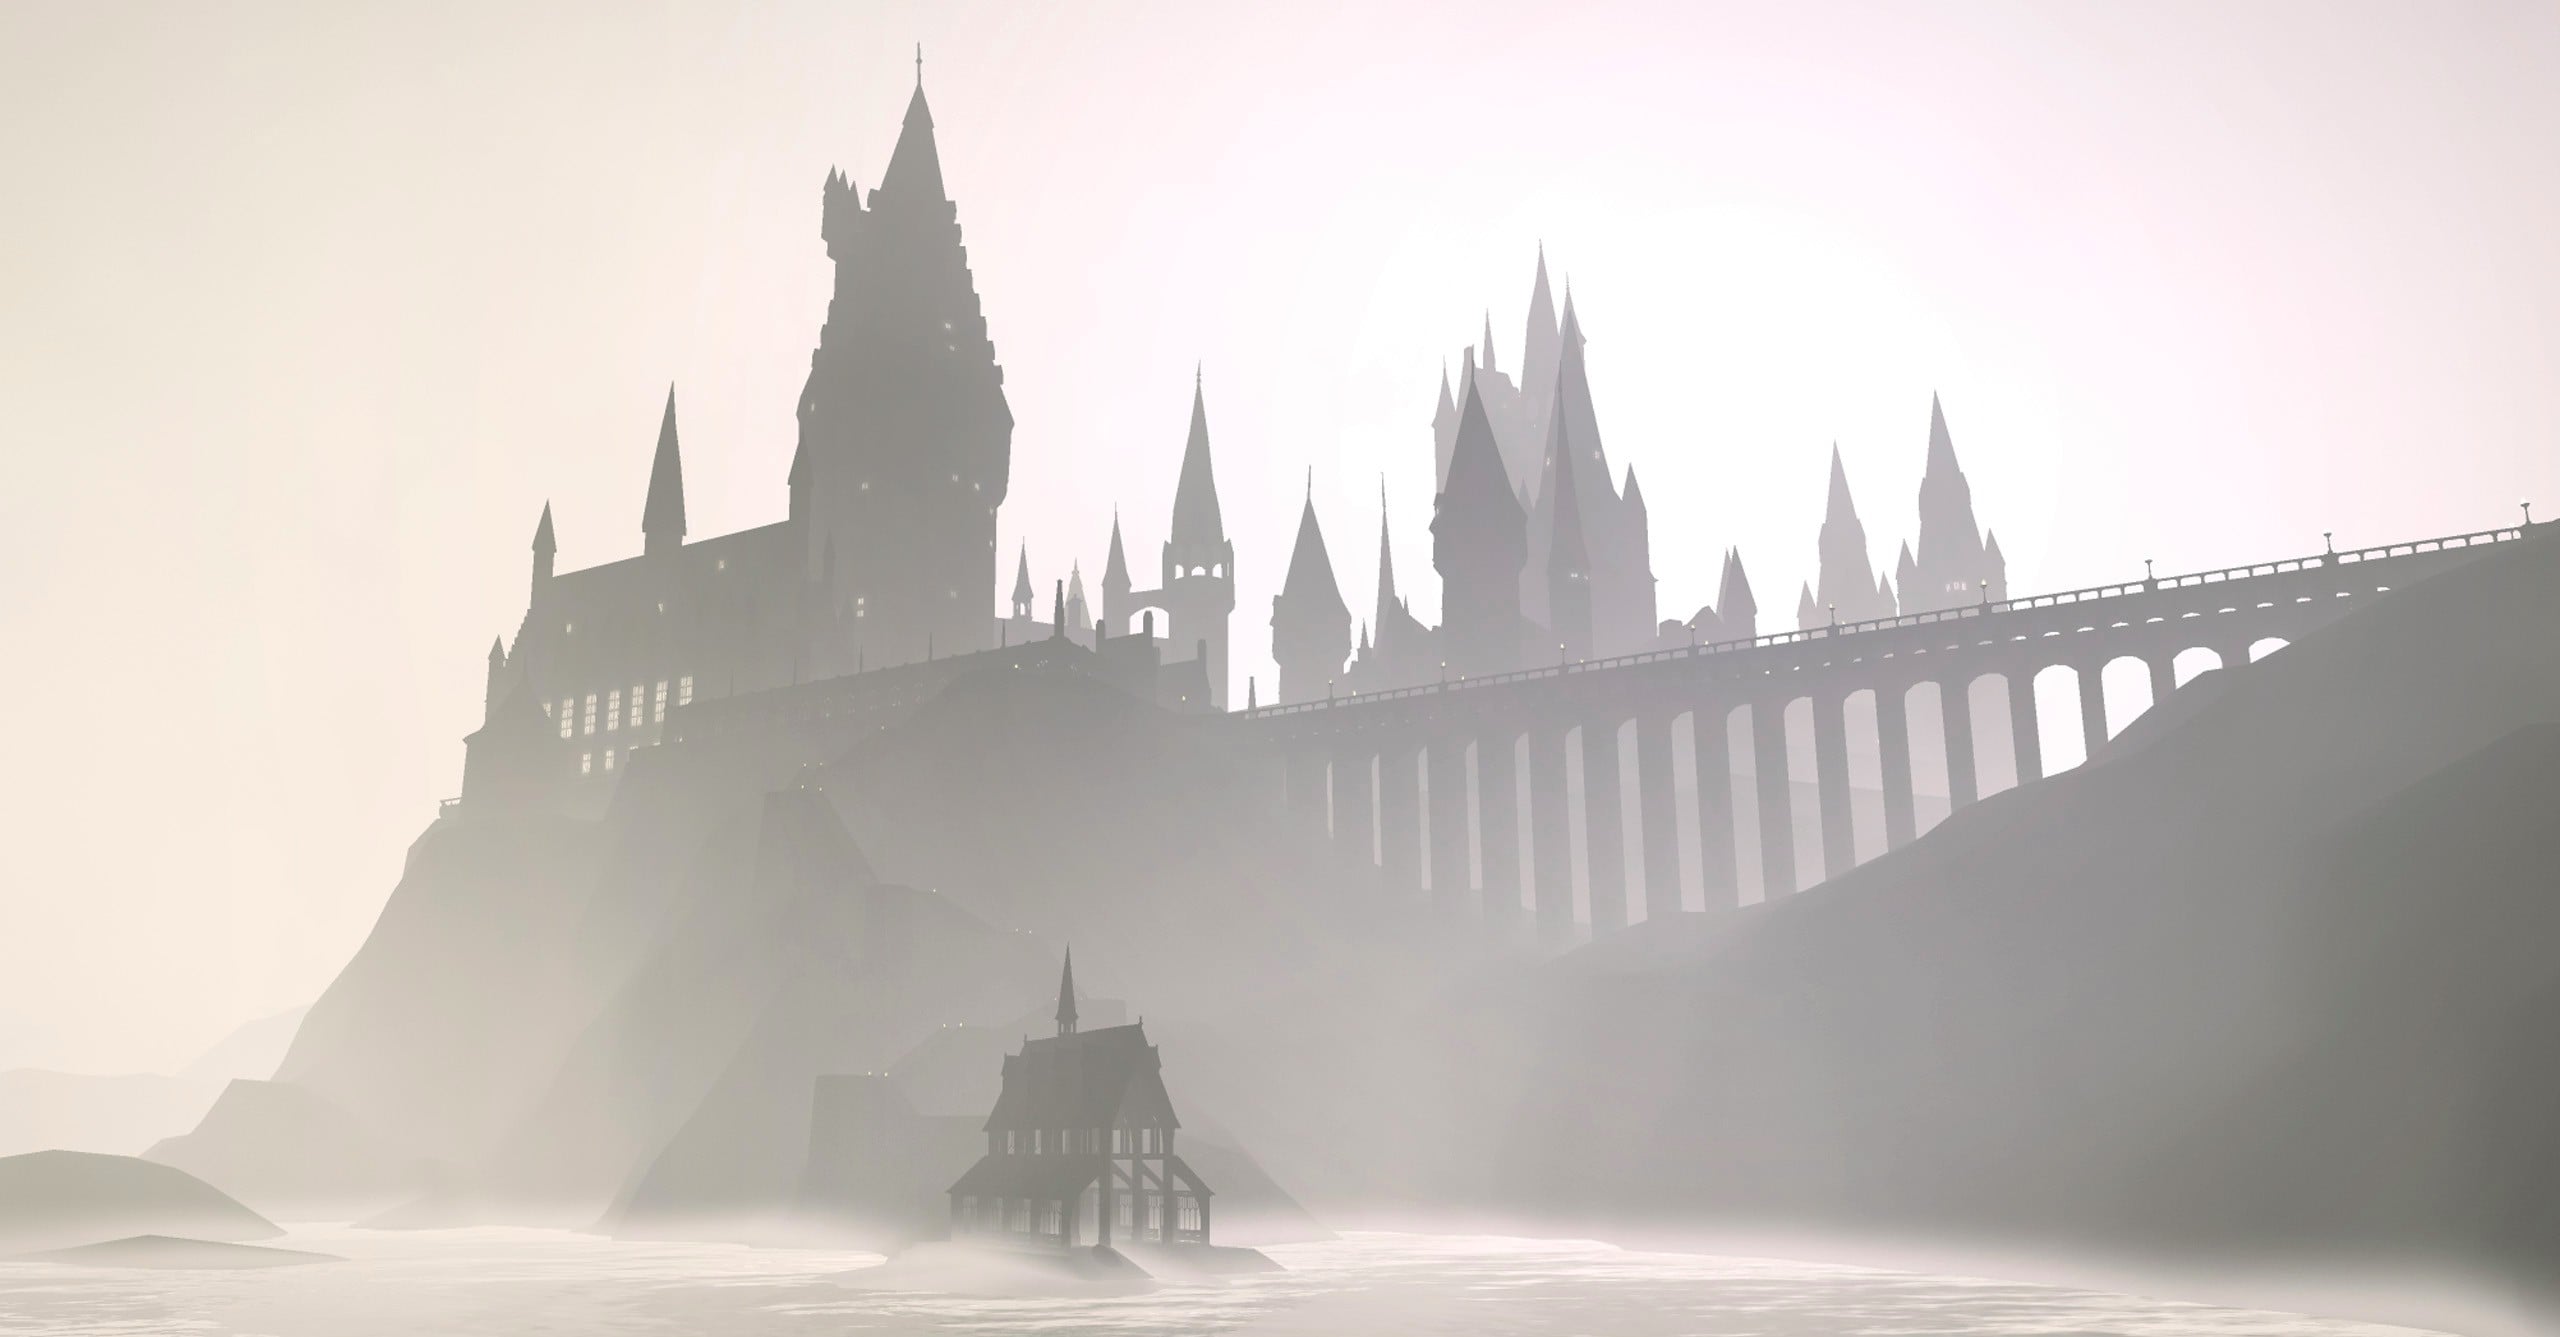 Why Pottermore is wrong